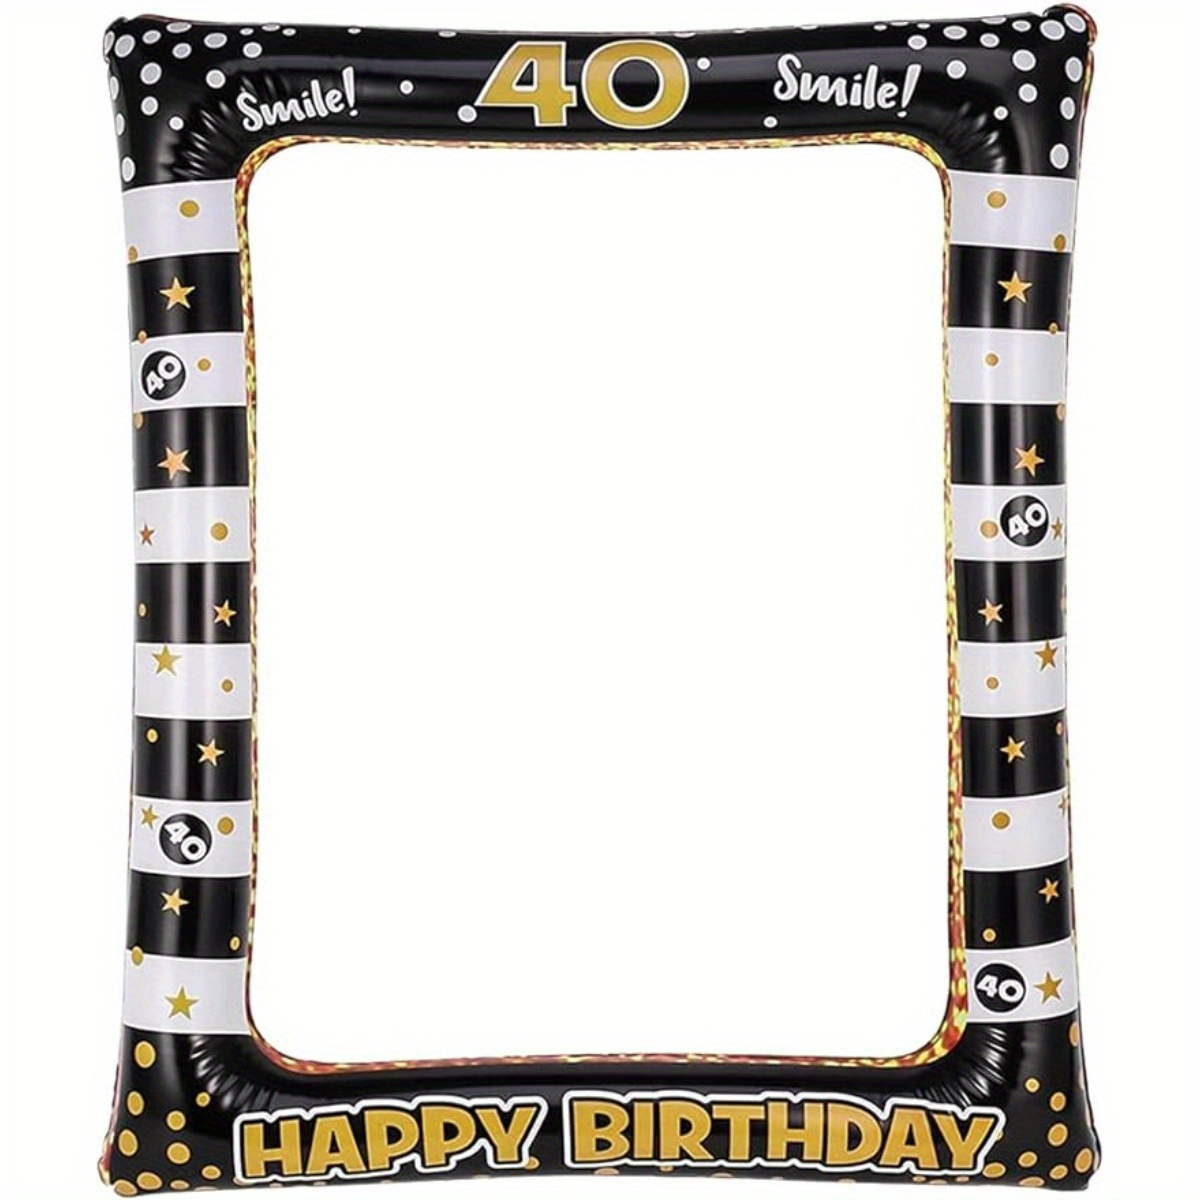 

festive Fun" 40th Birthday Inflatable Selfie Frame - Black & Gold Photo Booth Prop, Fun Party Decoration, No Batteries Required